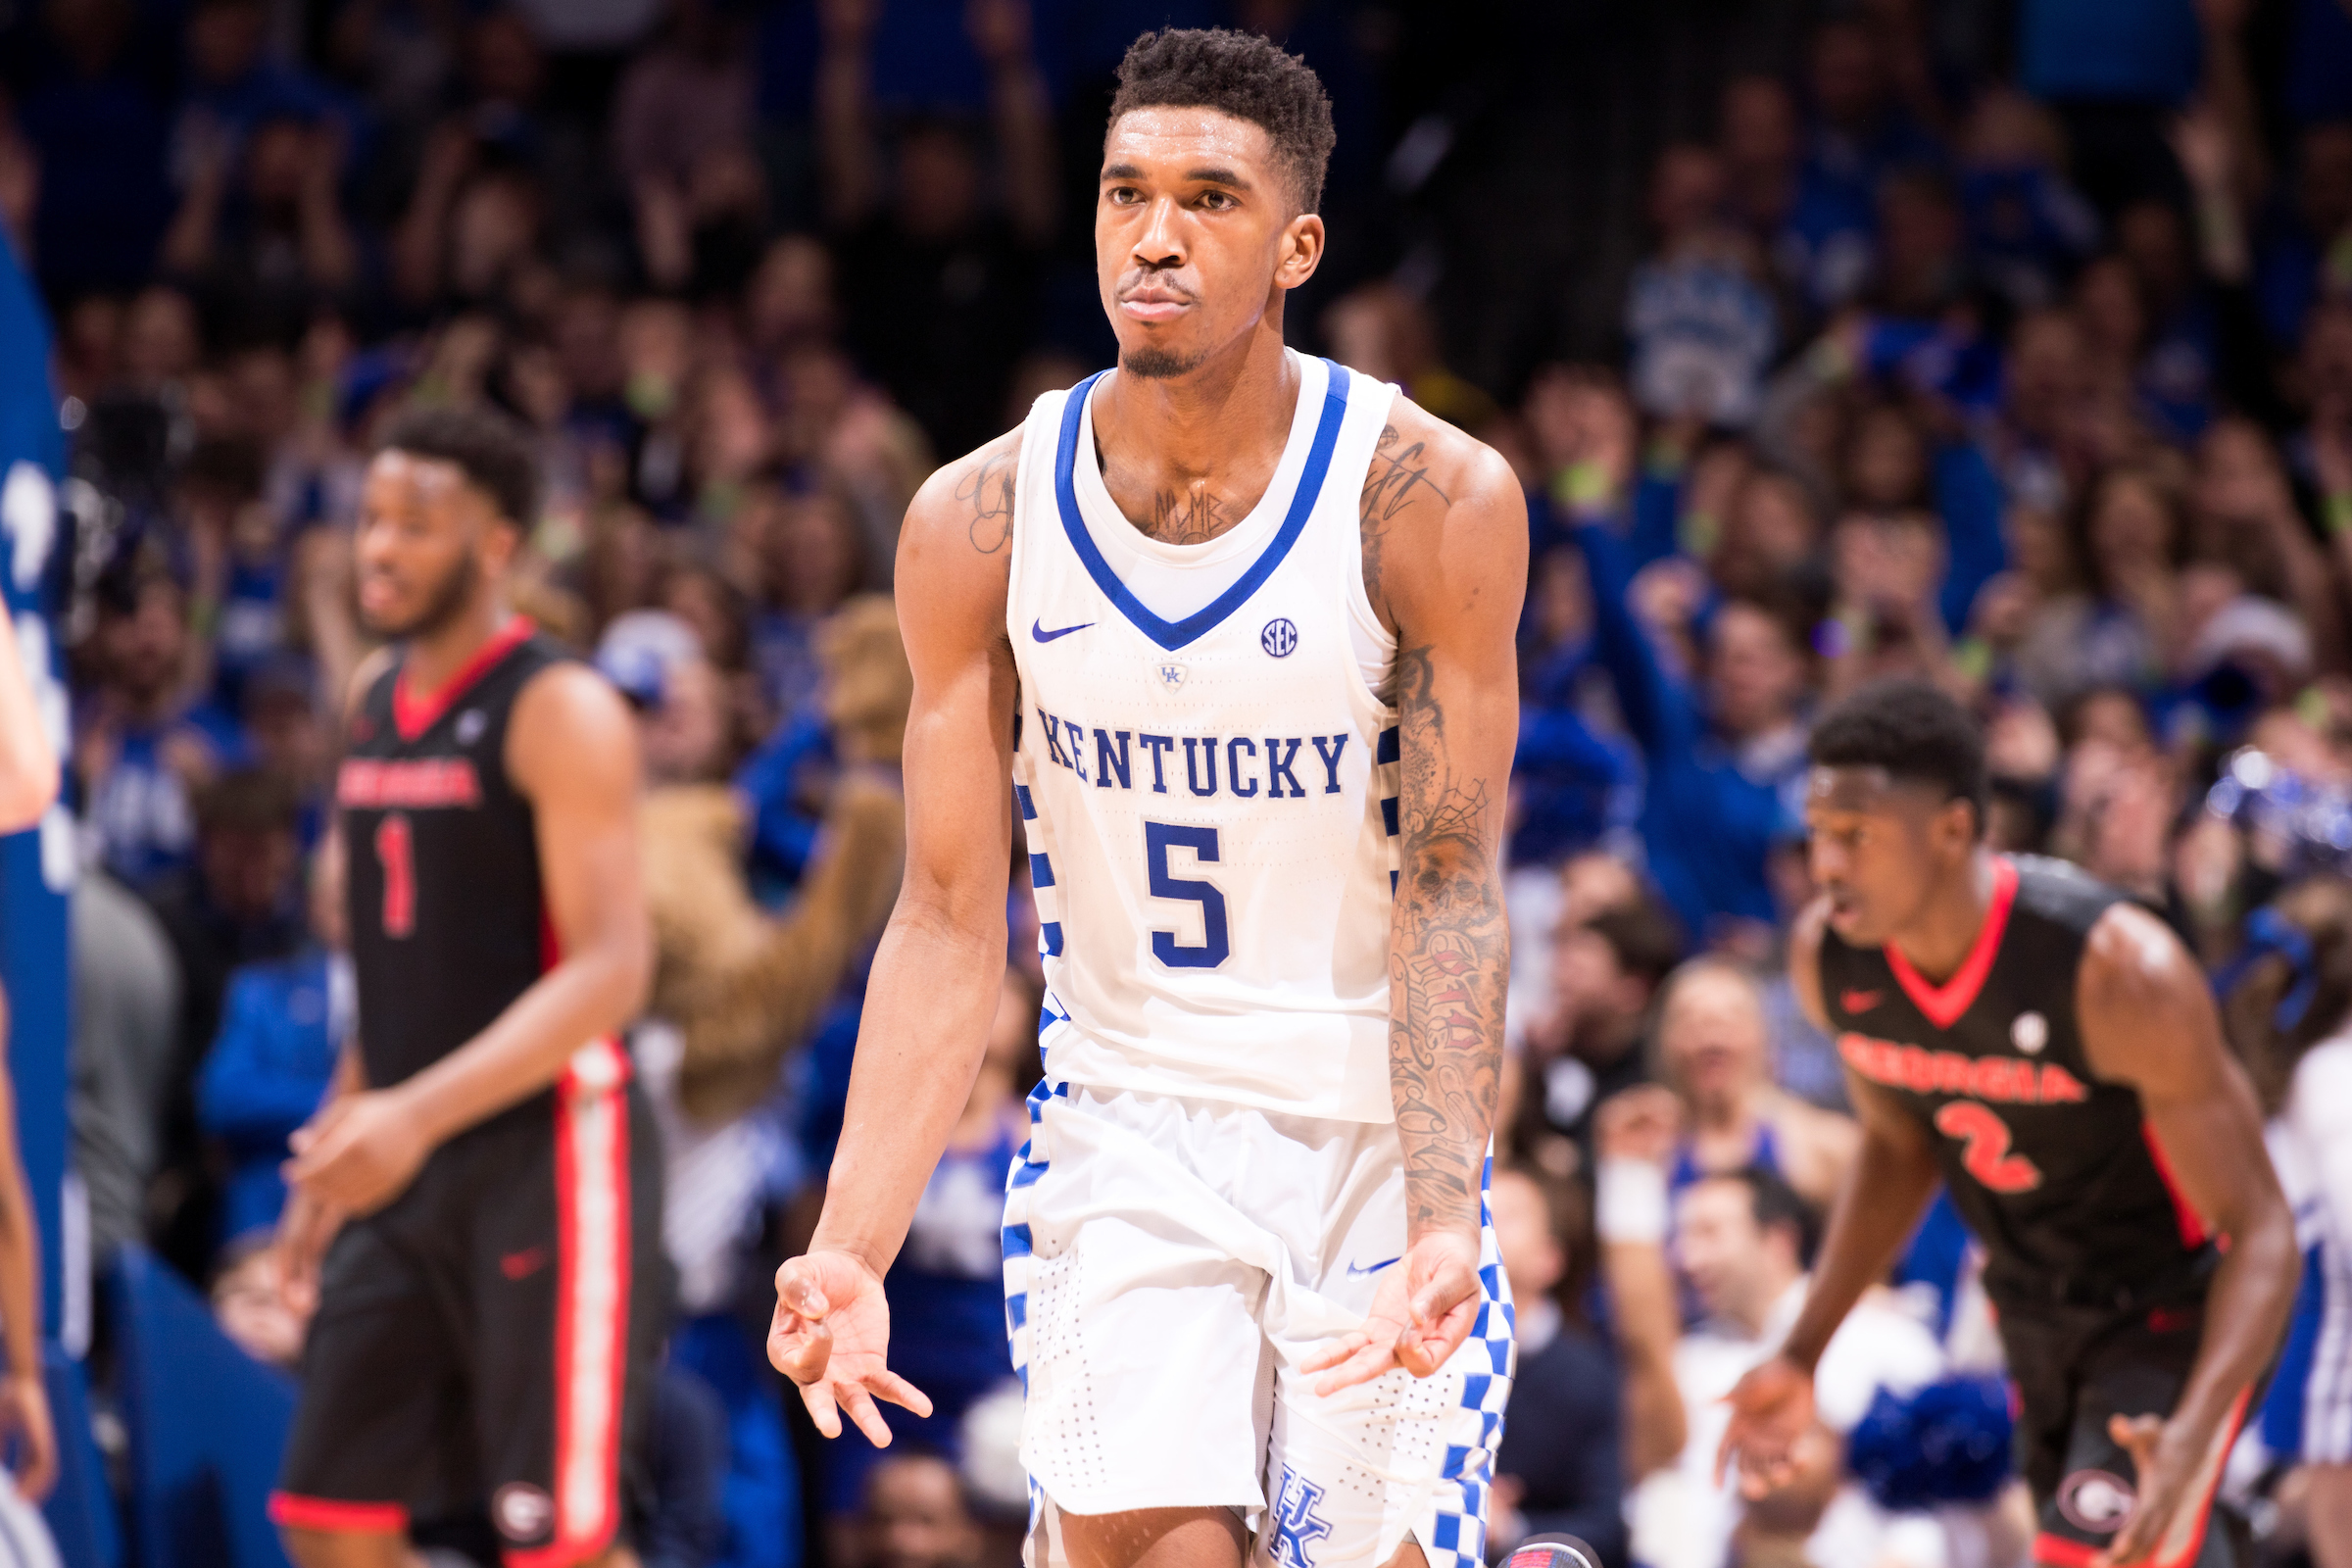 Kentucky-Georgia Game on Feb. 18 Confirmed for 6 p.m. Tip on ESPN